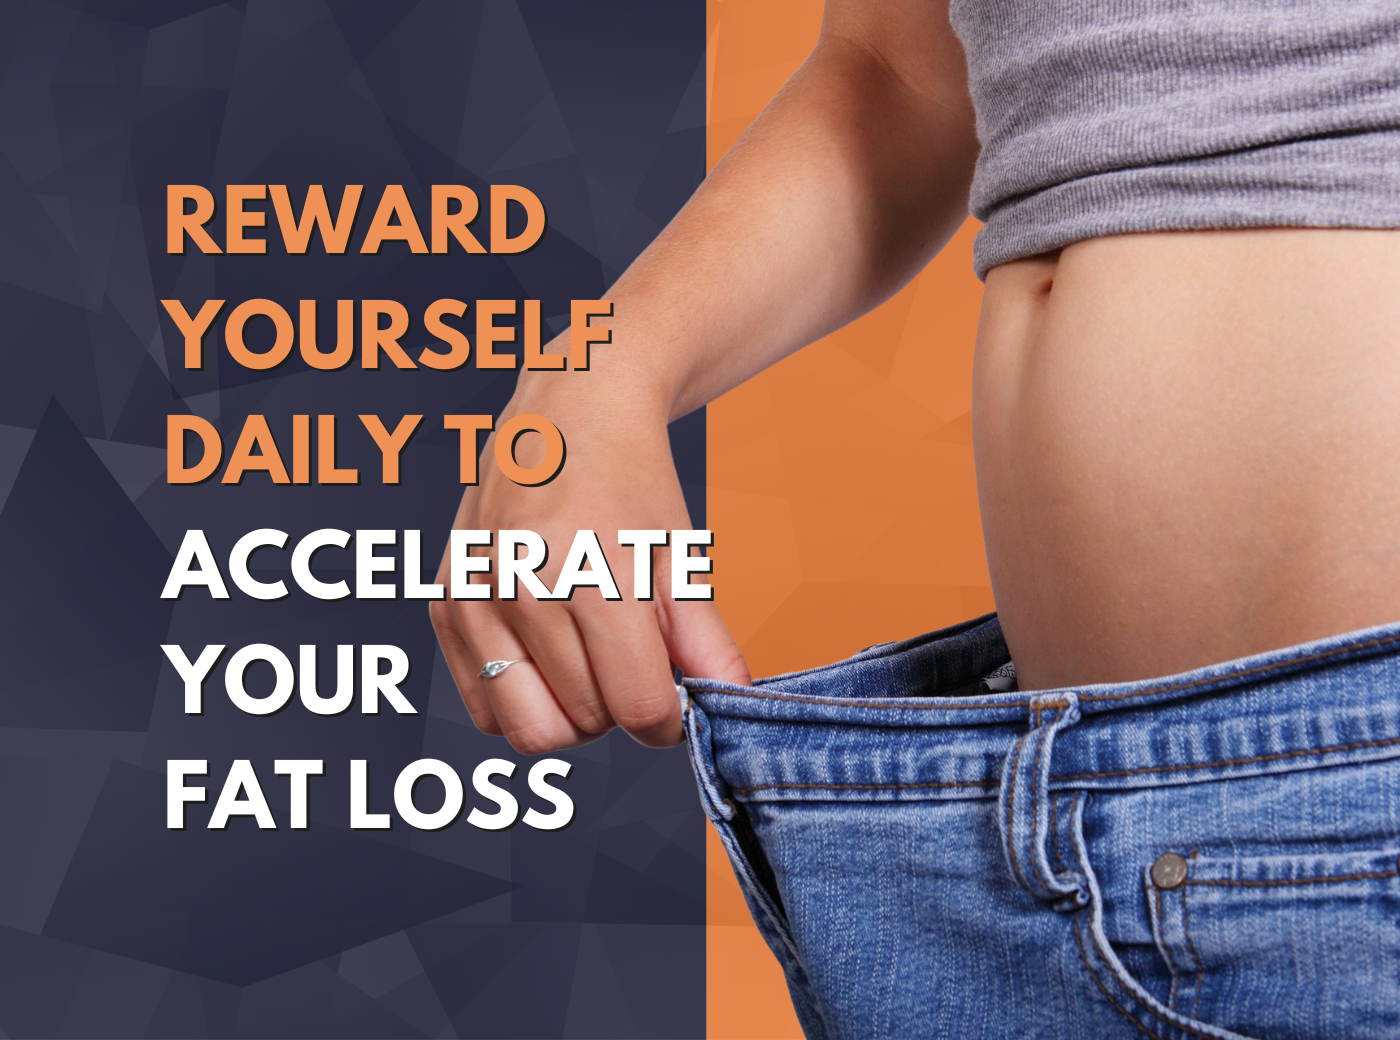 Reward yourself daily to accelerate your fat loss